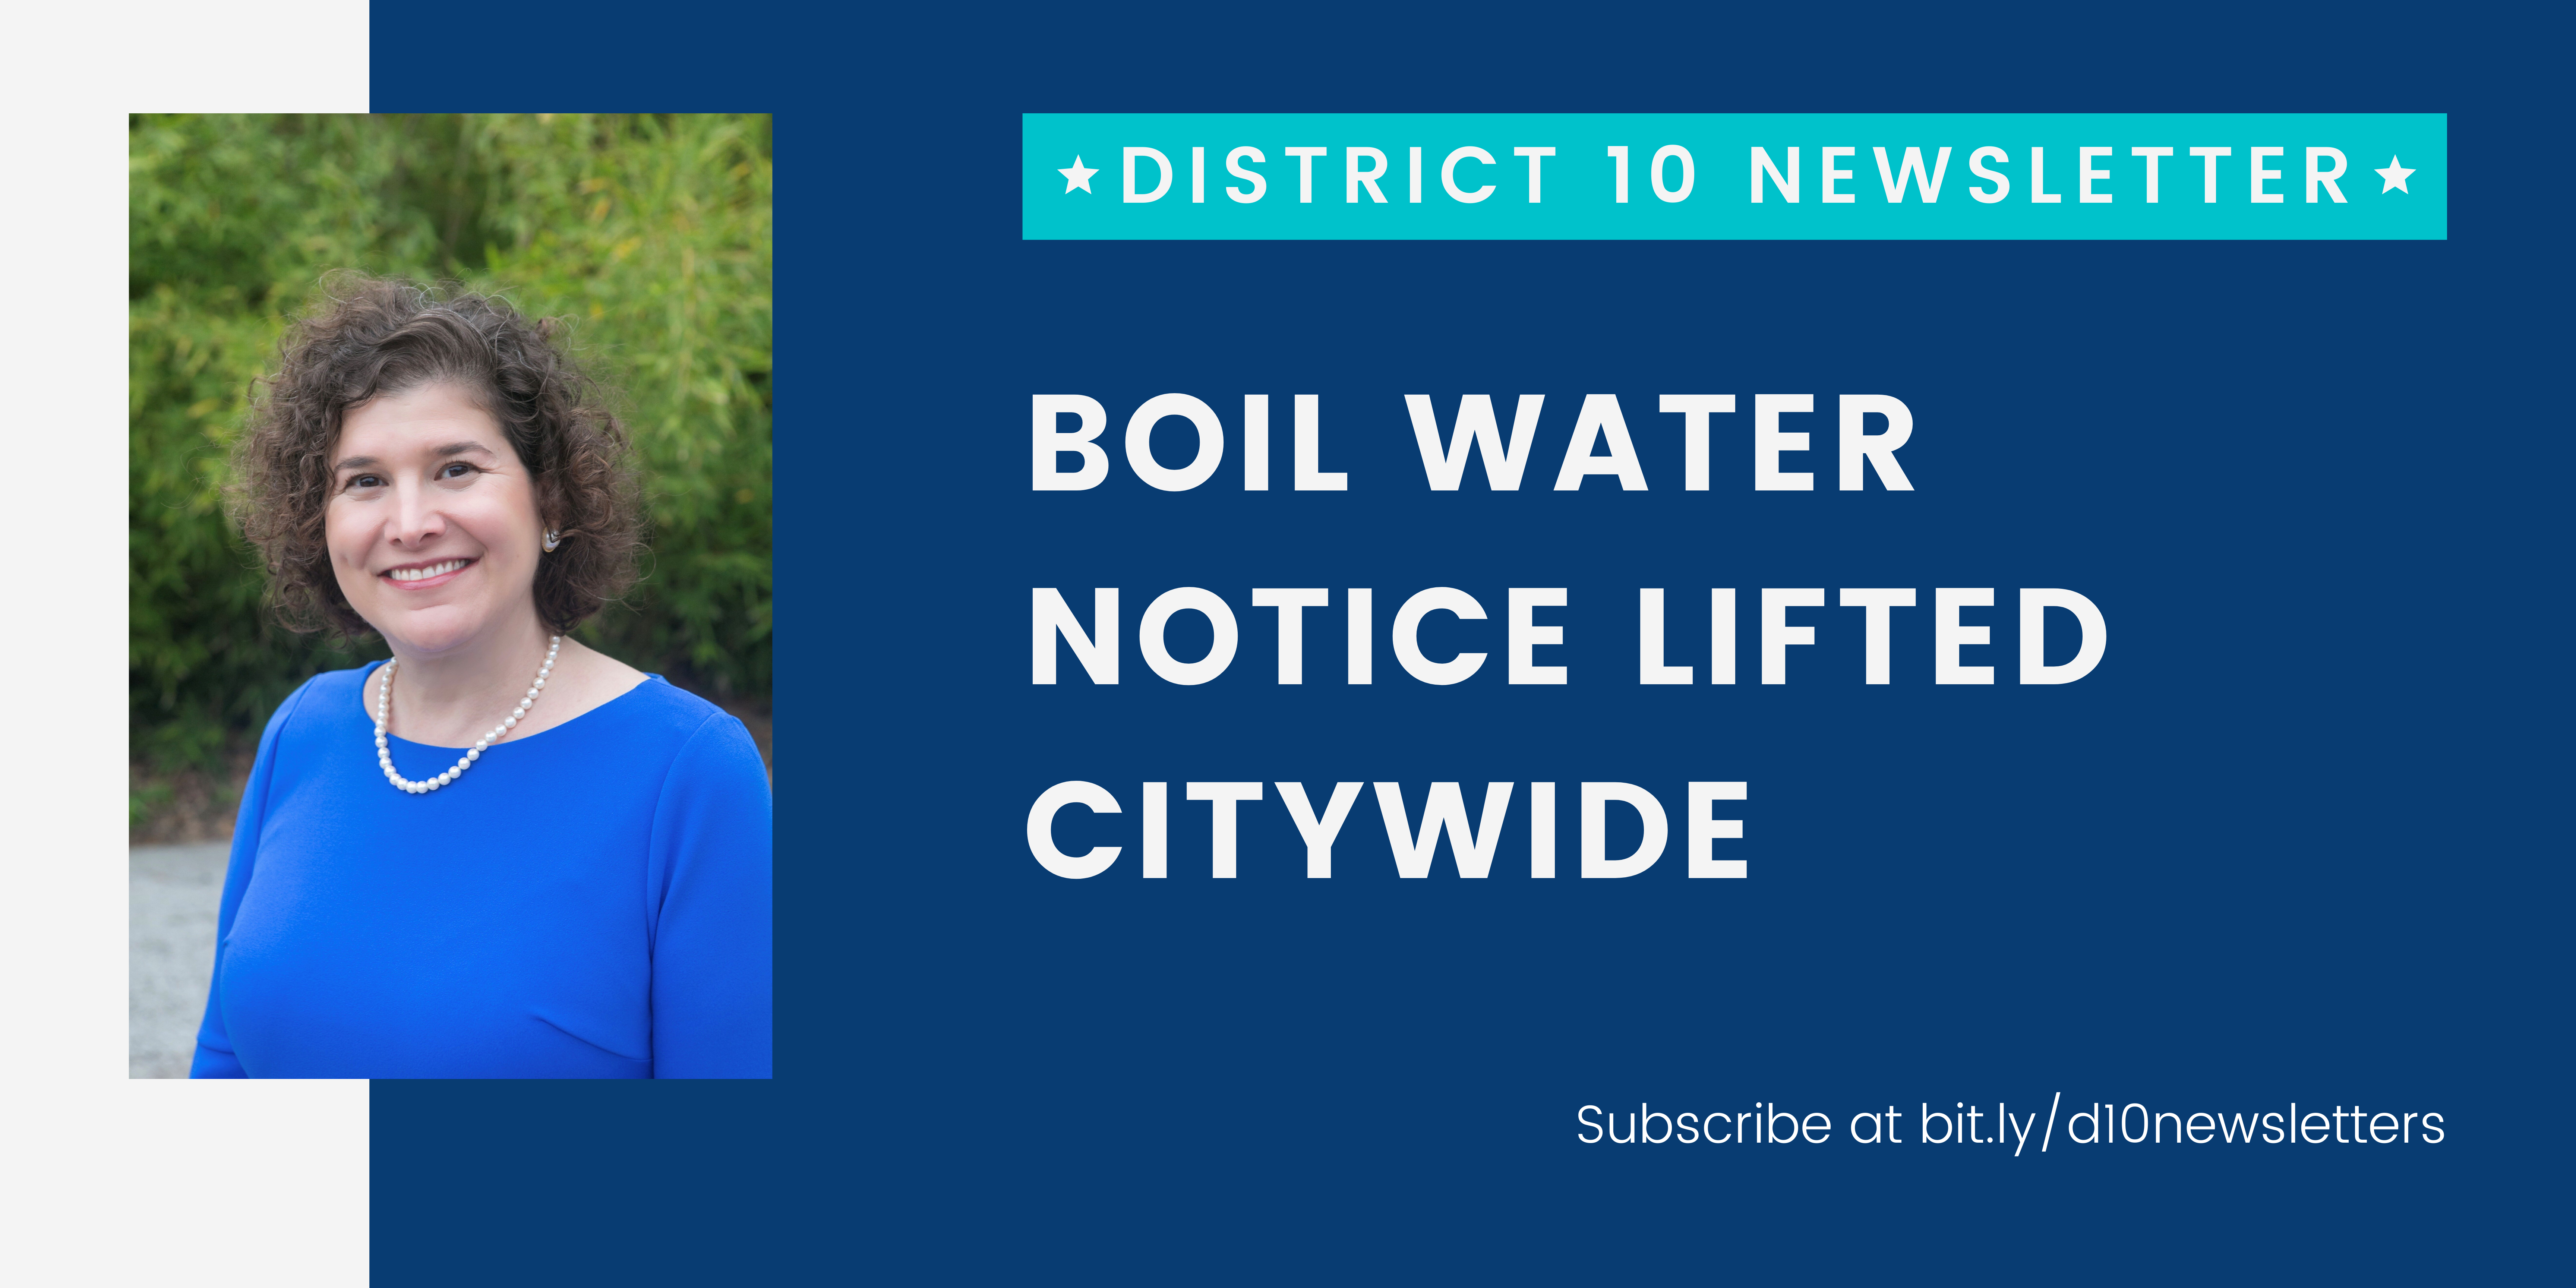 District 10 Newsletter; boil water notice lifted citywide Subscribe at bit.ly/d10newsletters